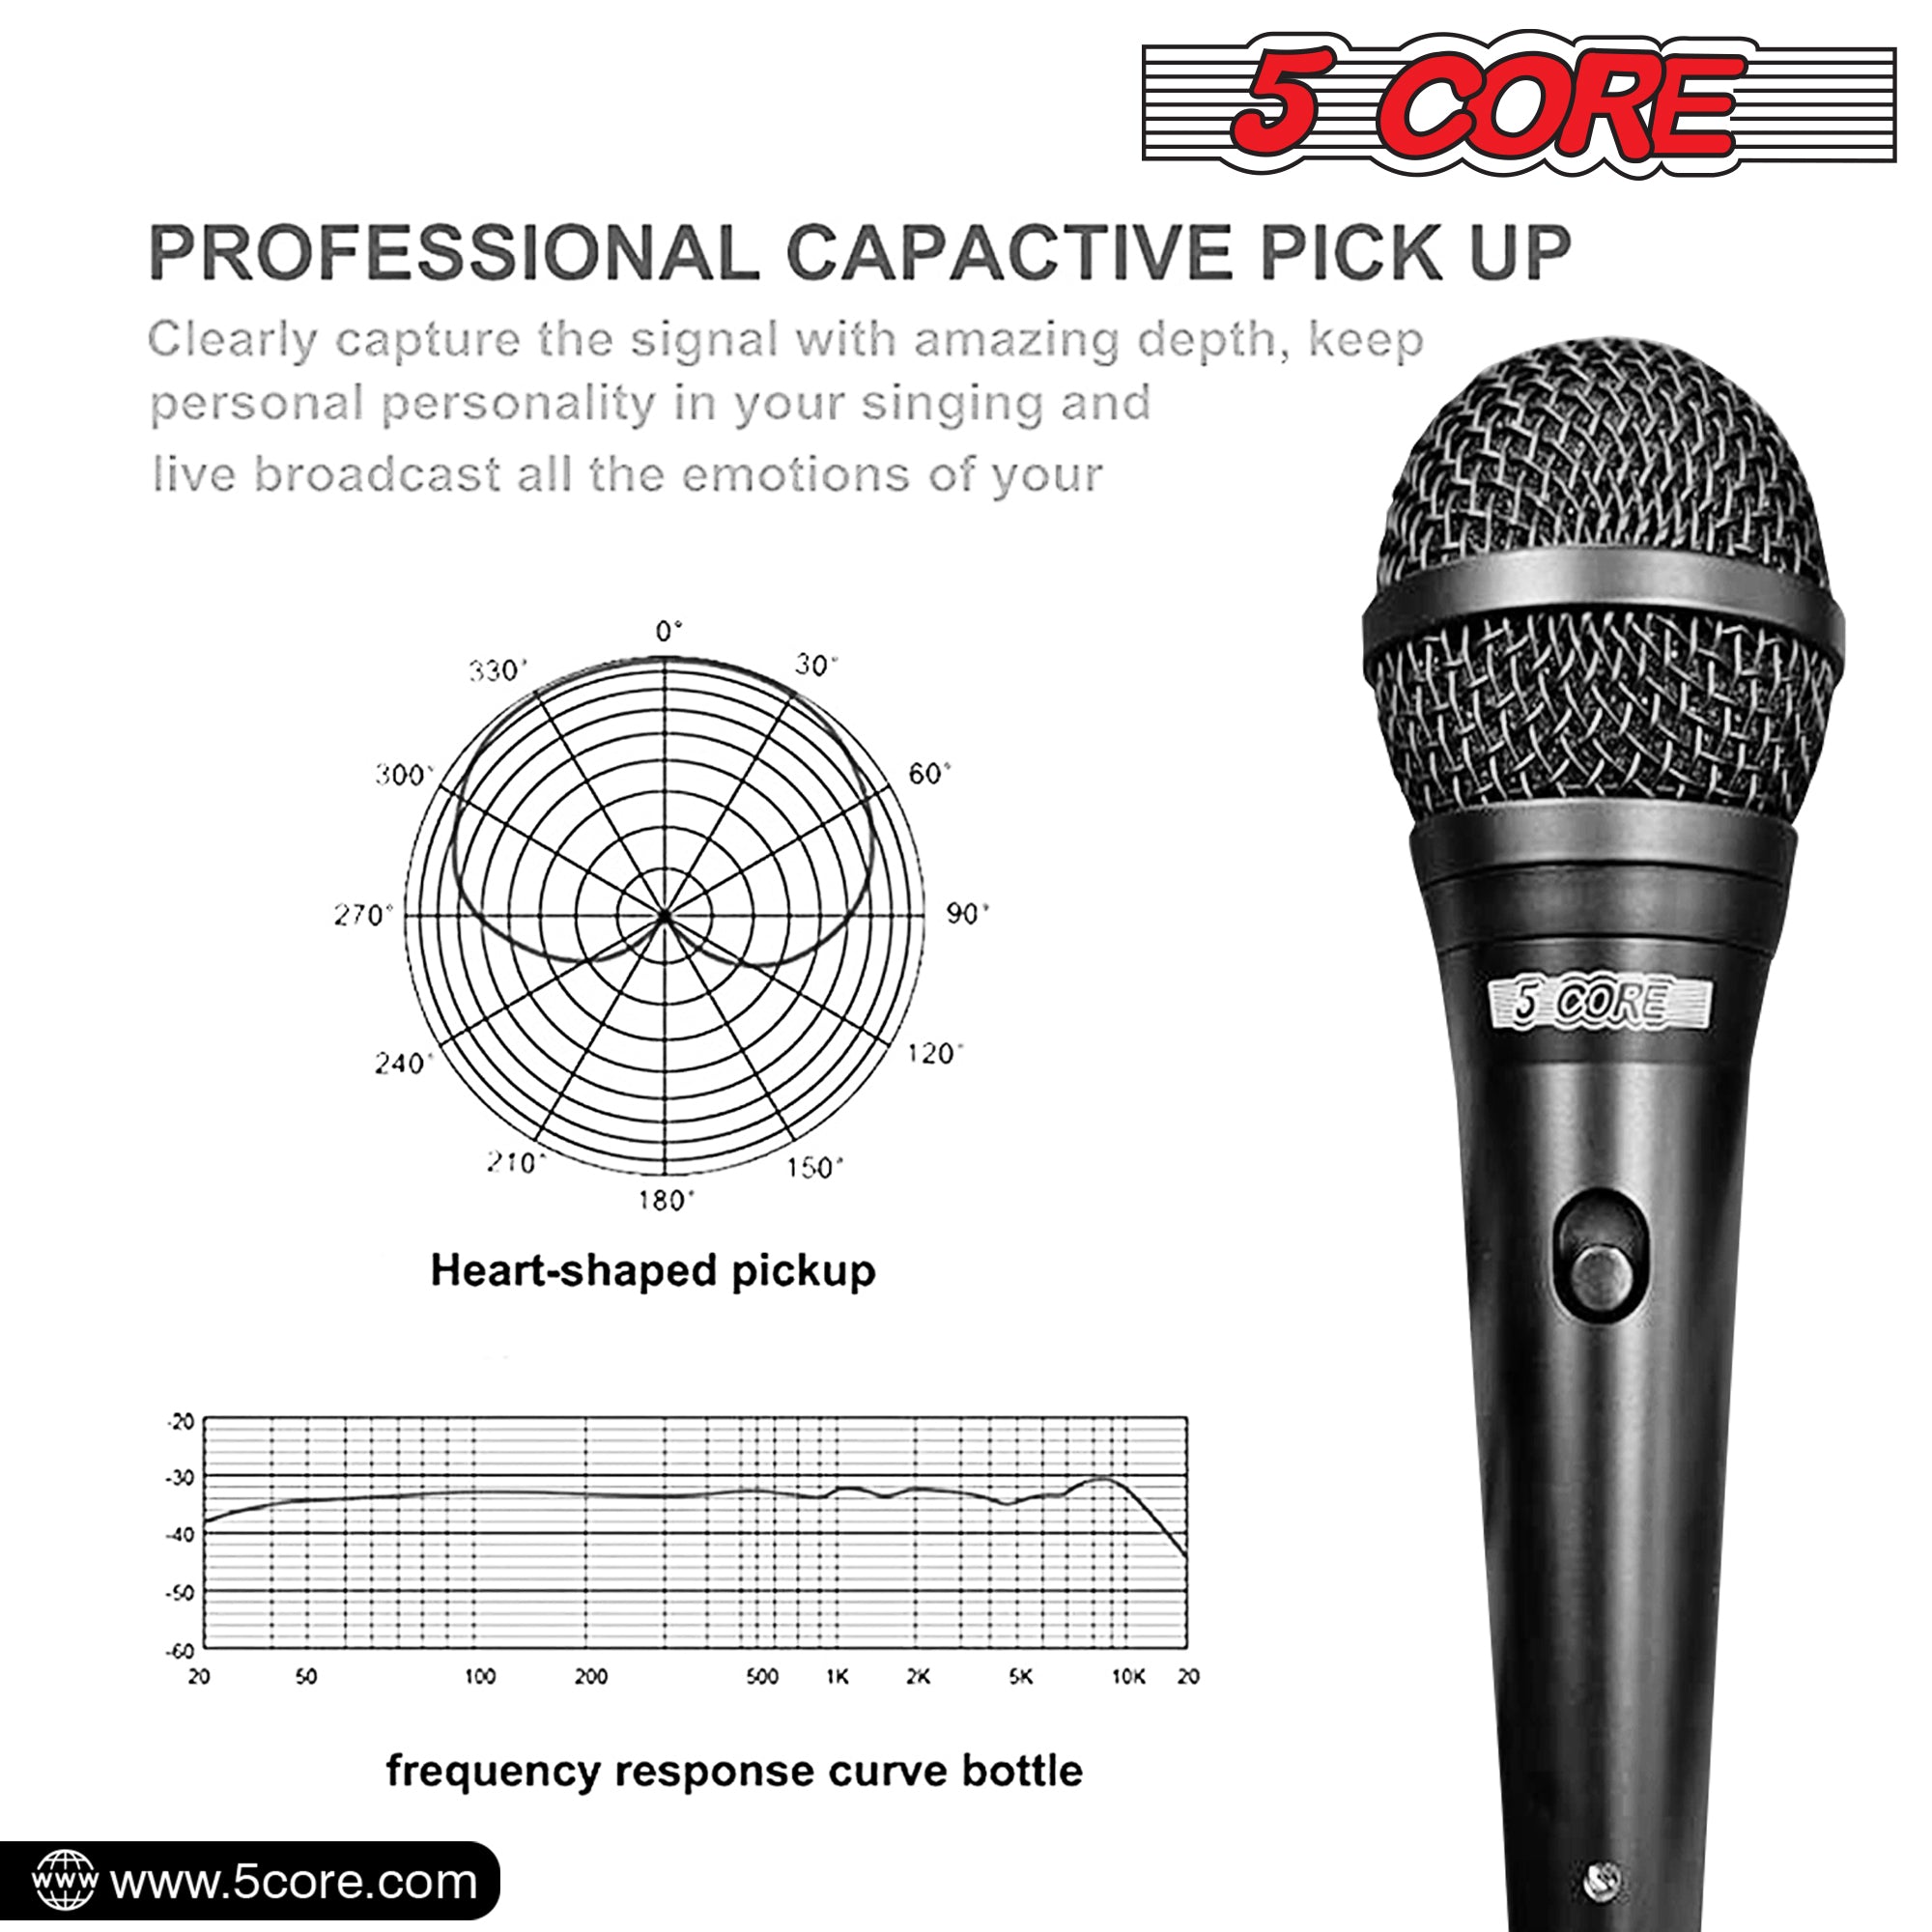 5 Core Handheld Dynamic Microphone & Low Profile Tripod Metal Stand Set • w 2 Wired Mic • XLR Cable